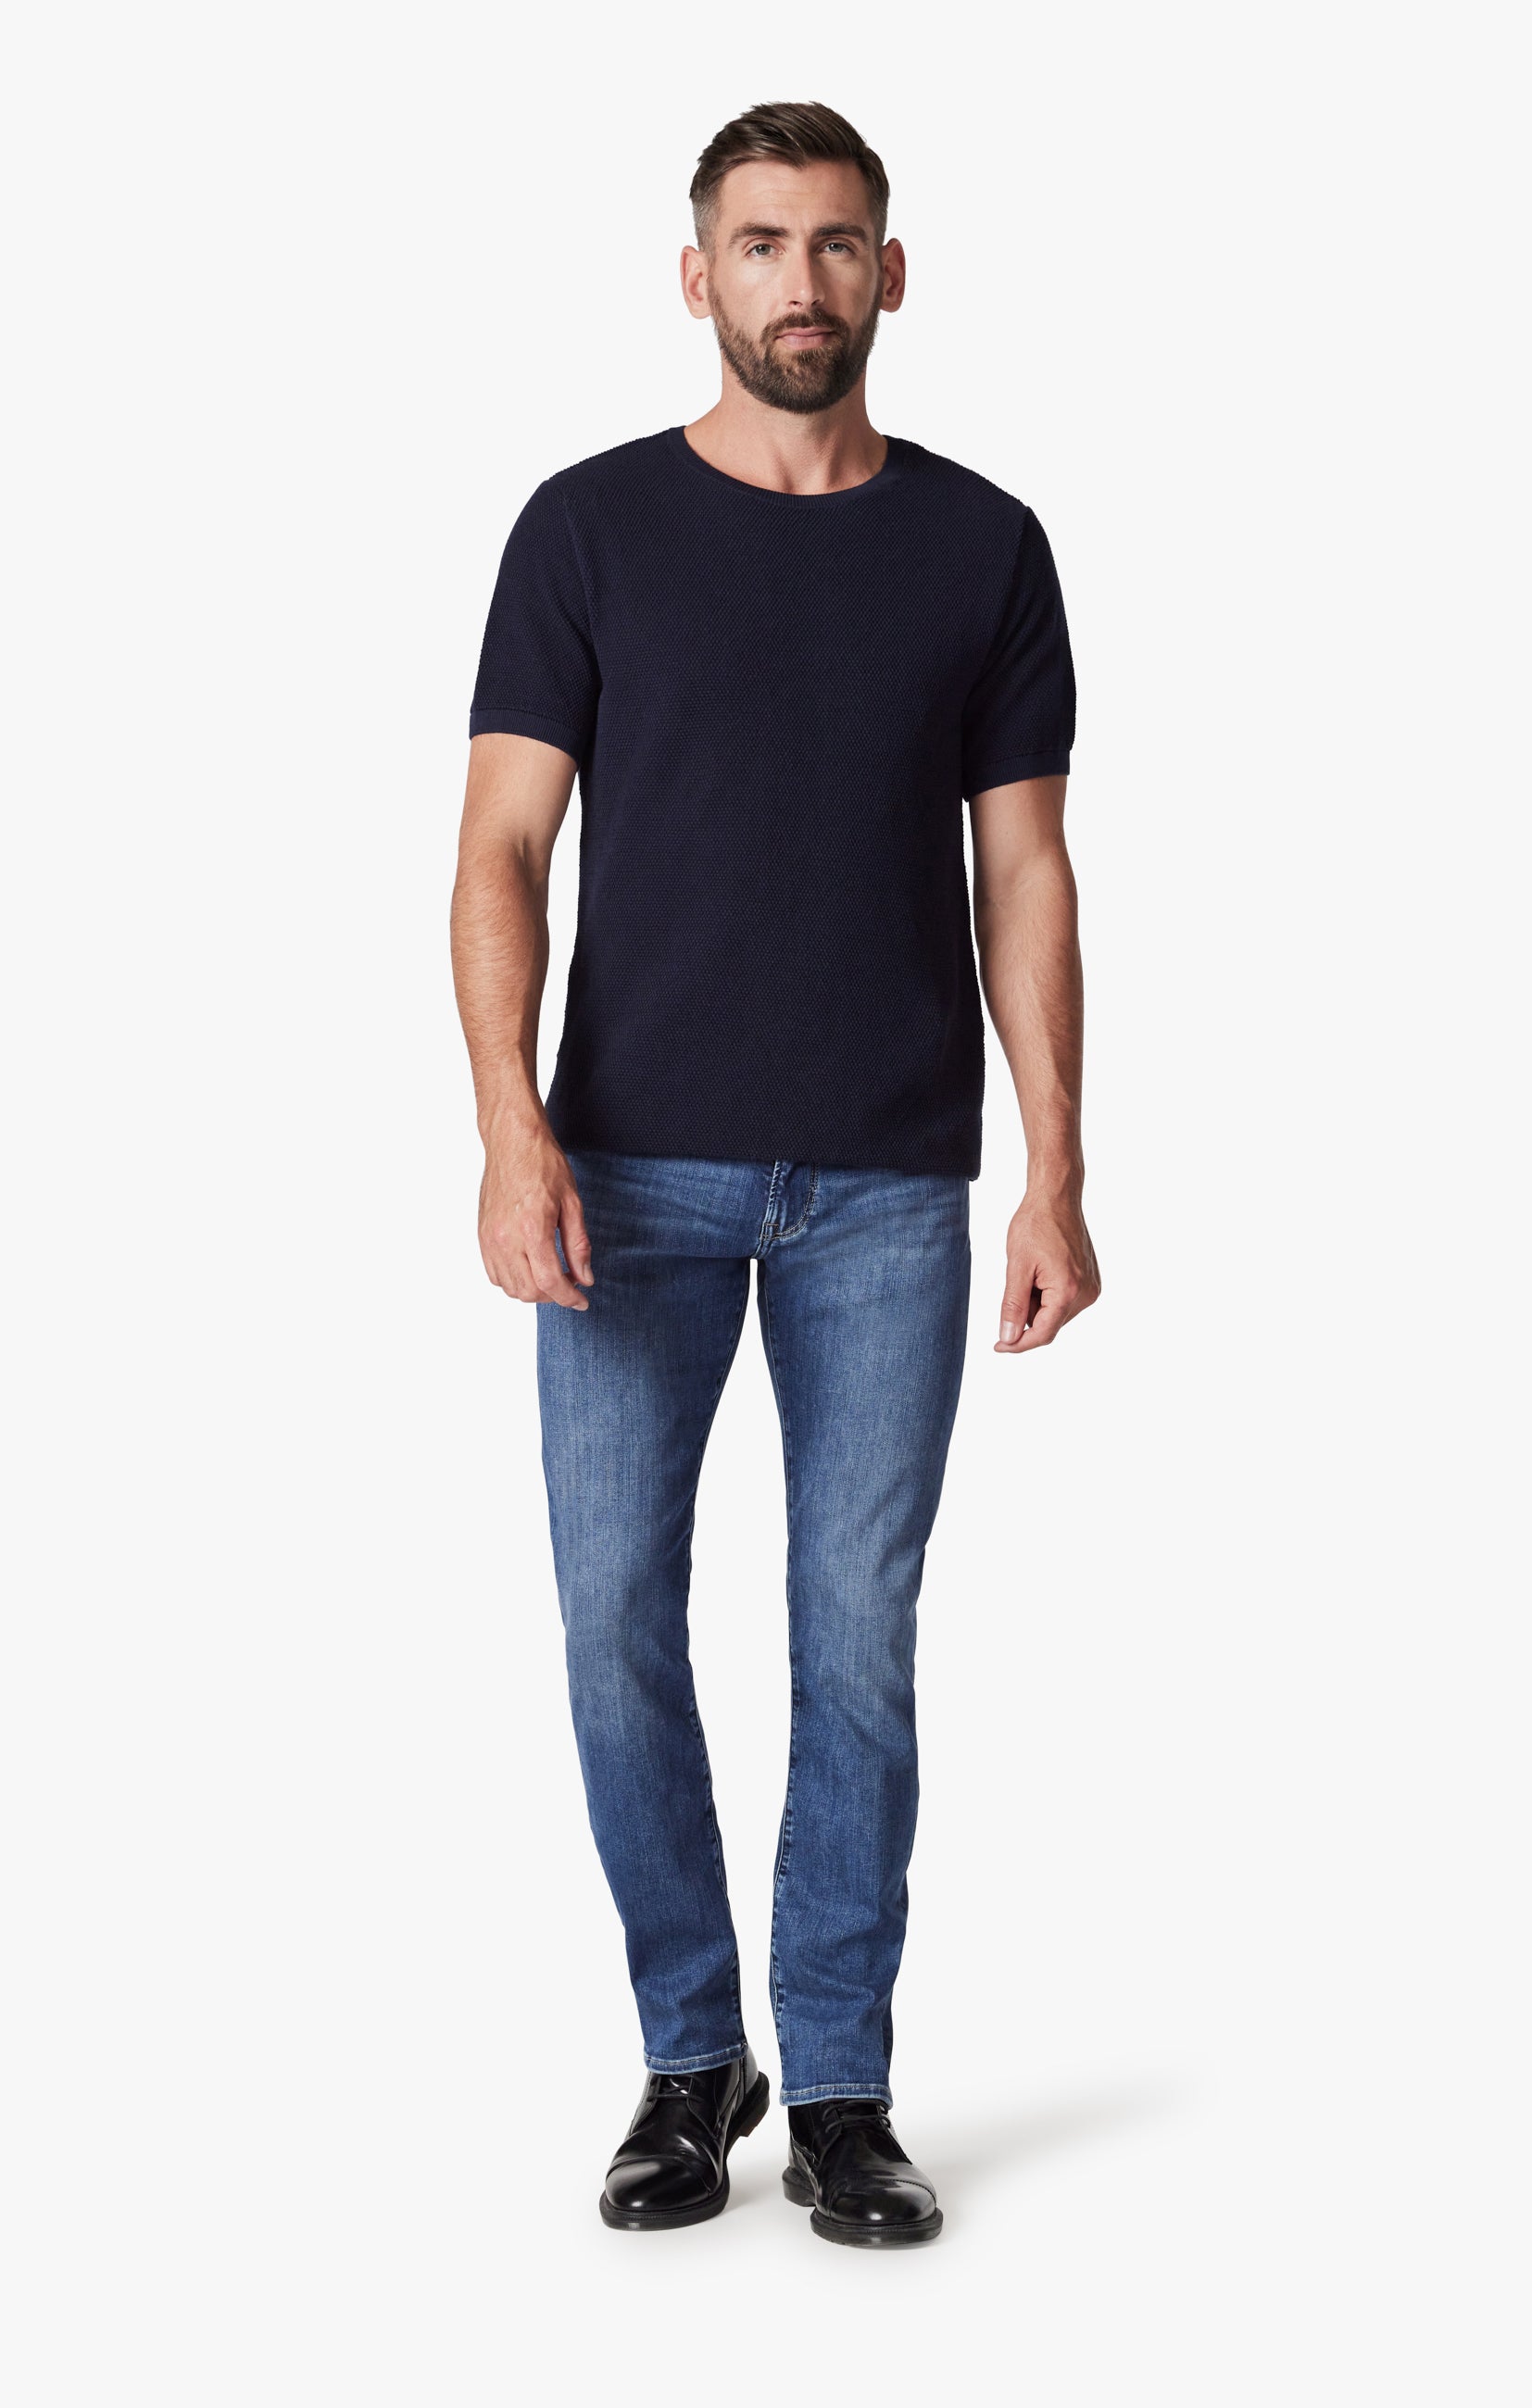 Courage Straight Leg Jeans In Mid Brushed Refined Image 2